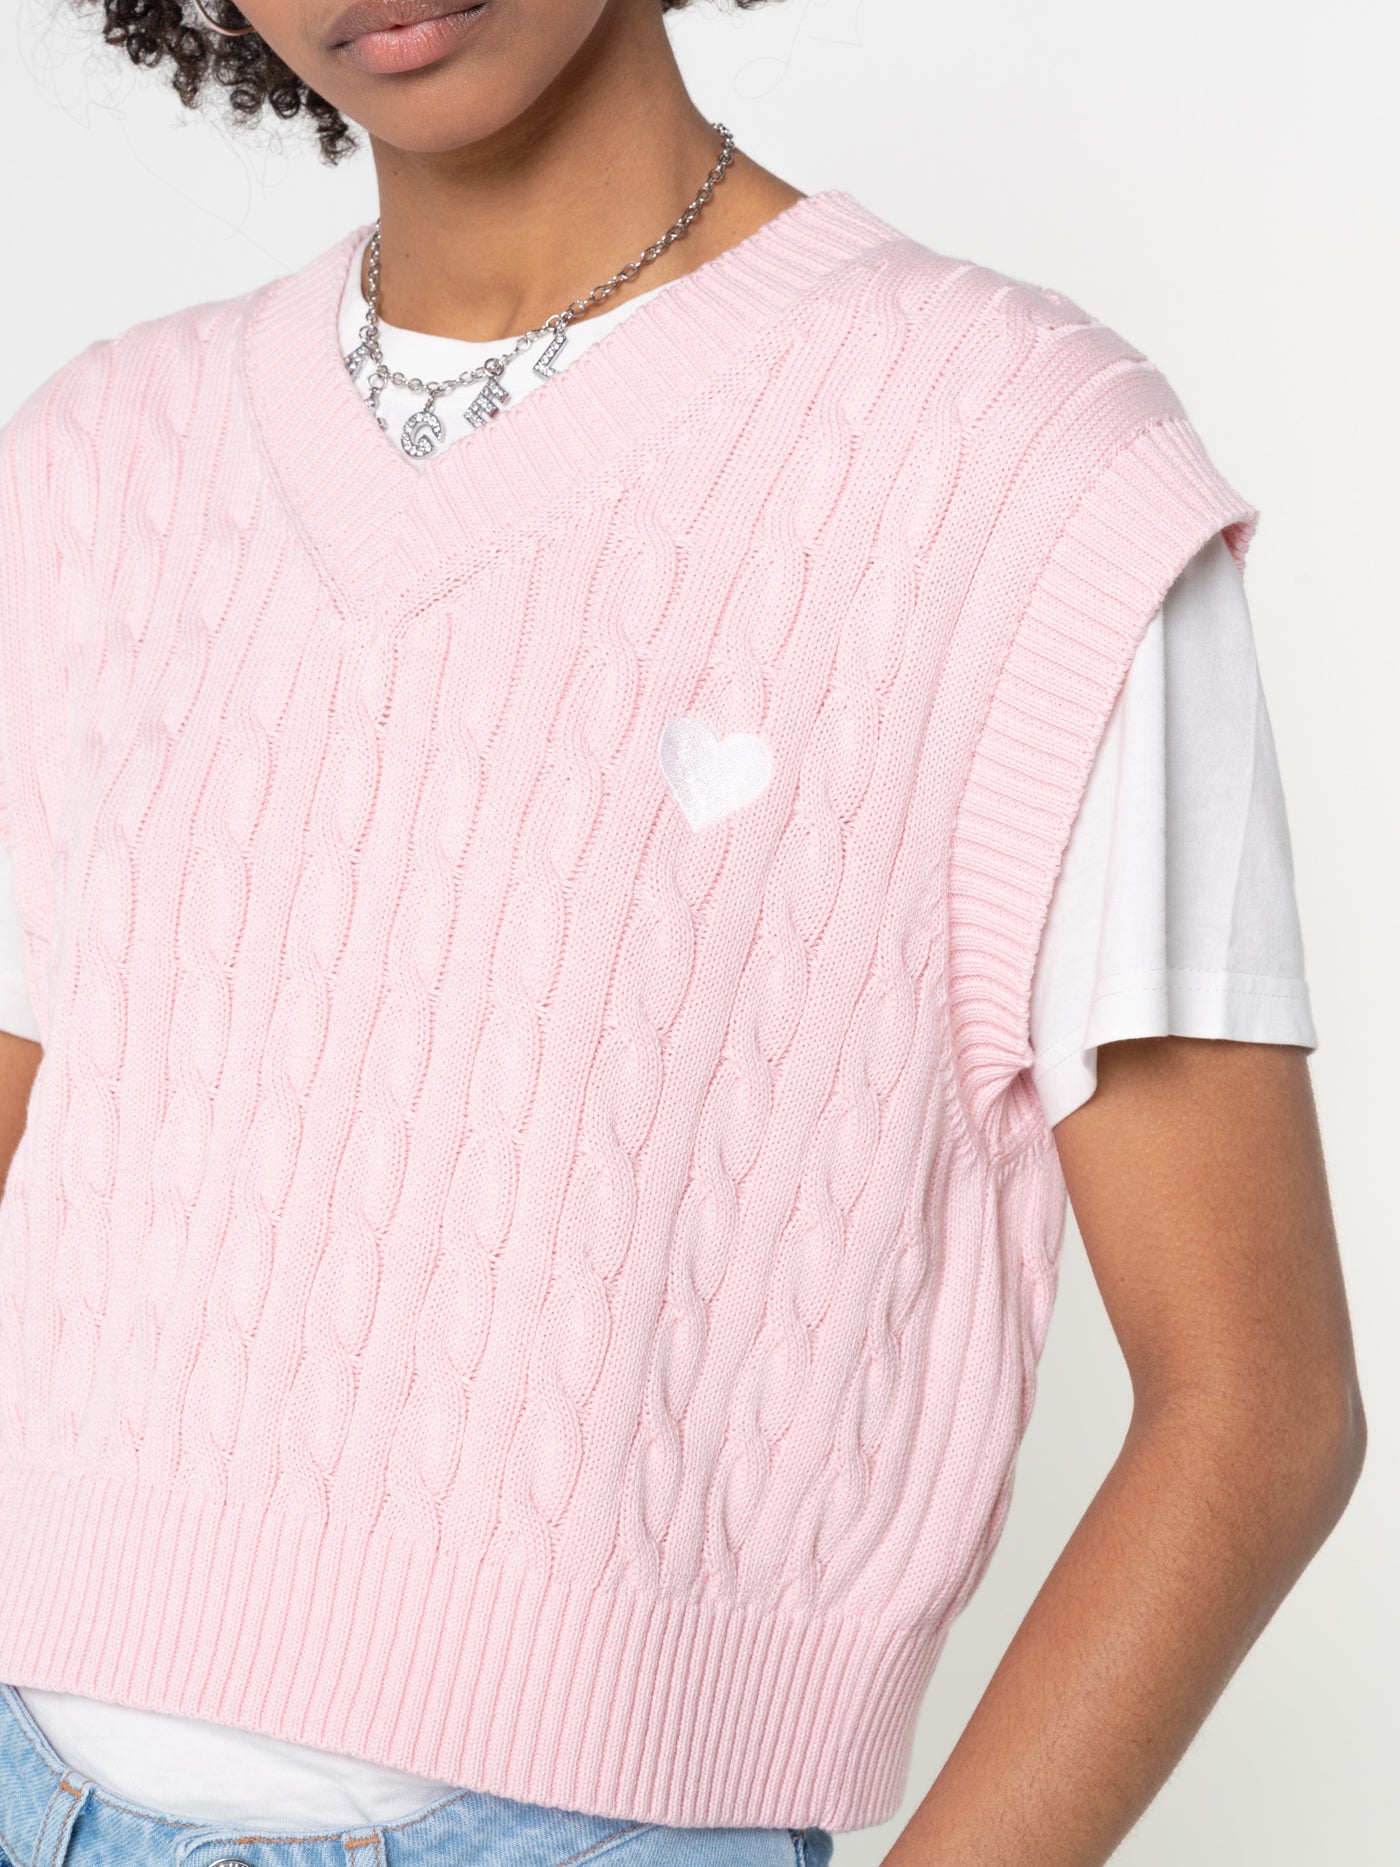 Heart Pink Cable Knitted Sweater Vest - Minga London